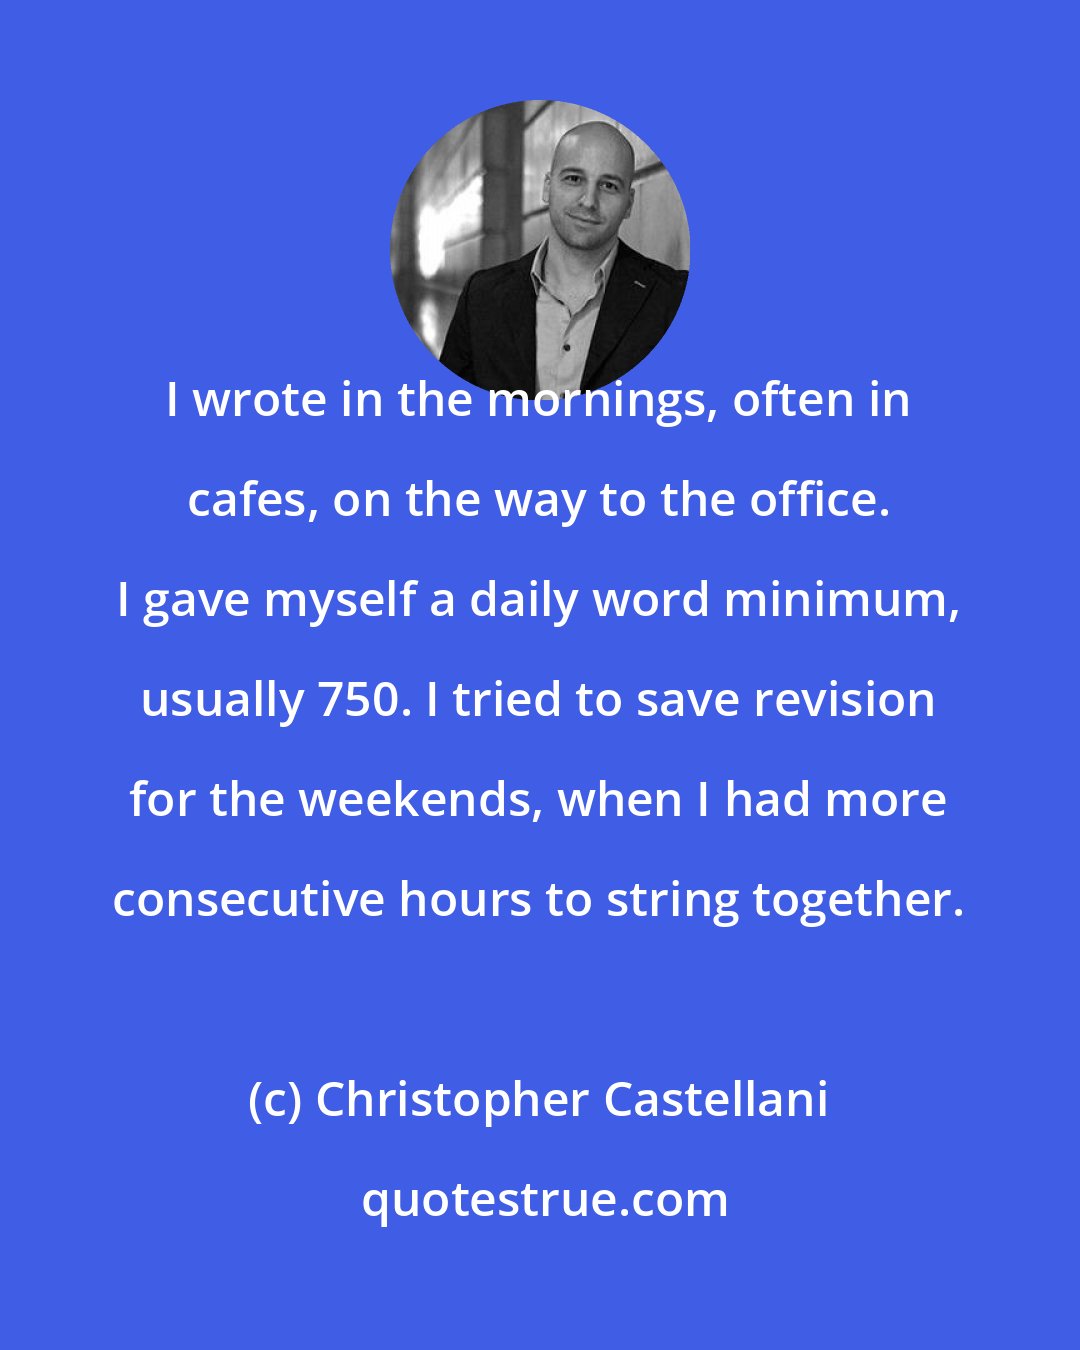 Christopher Castellani: I wrote in the mornings, often in cafes, on the way to the office. I gave myself a daily word minimum, usually 750. I tried to save revision for the weekends, when I had more consecutive hours to string together.